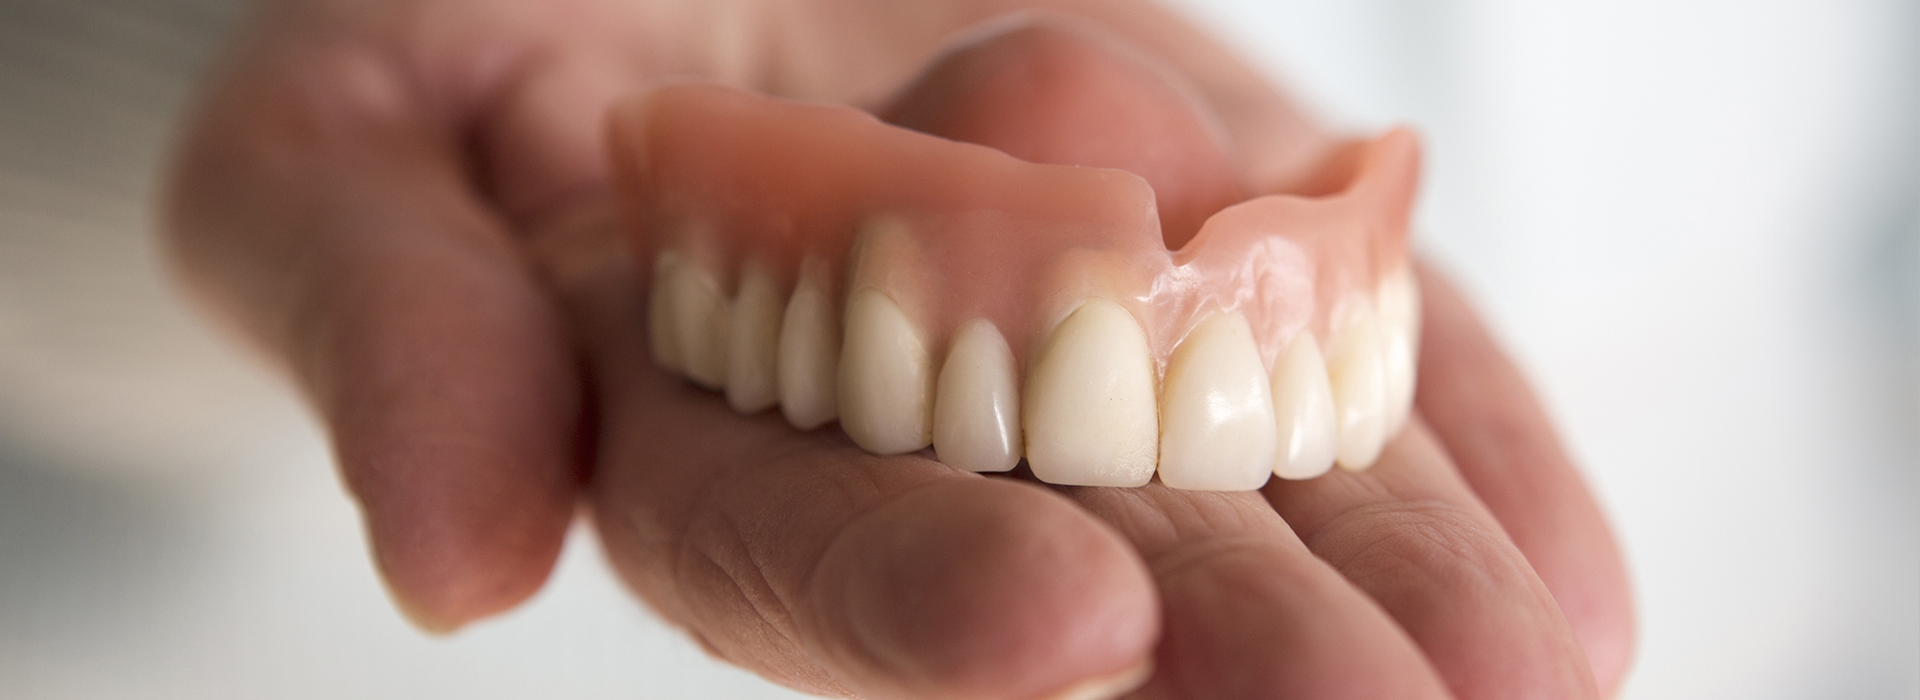 An adult hand holding a set of dentures, showcasing the upper and lower false teeth.